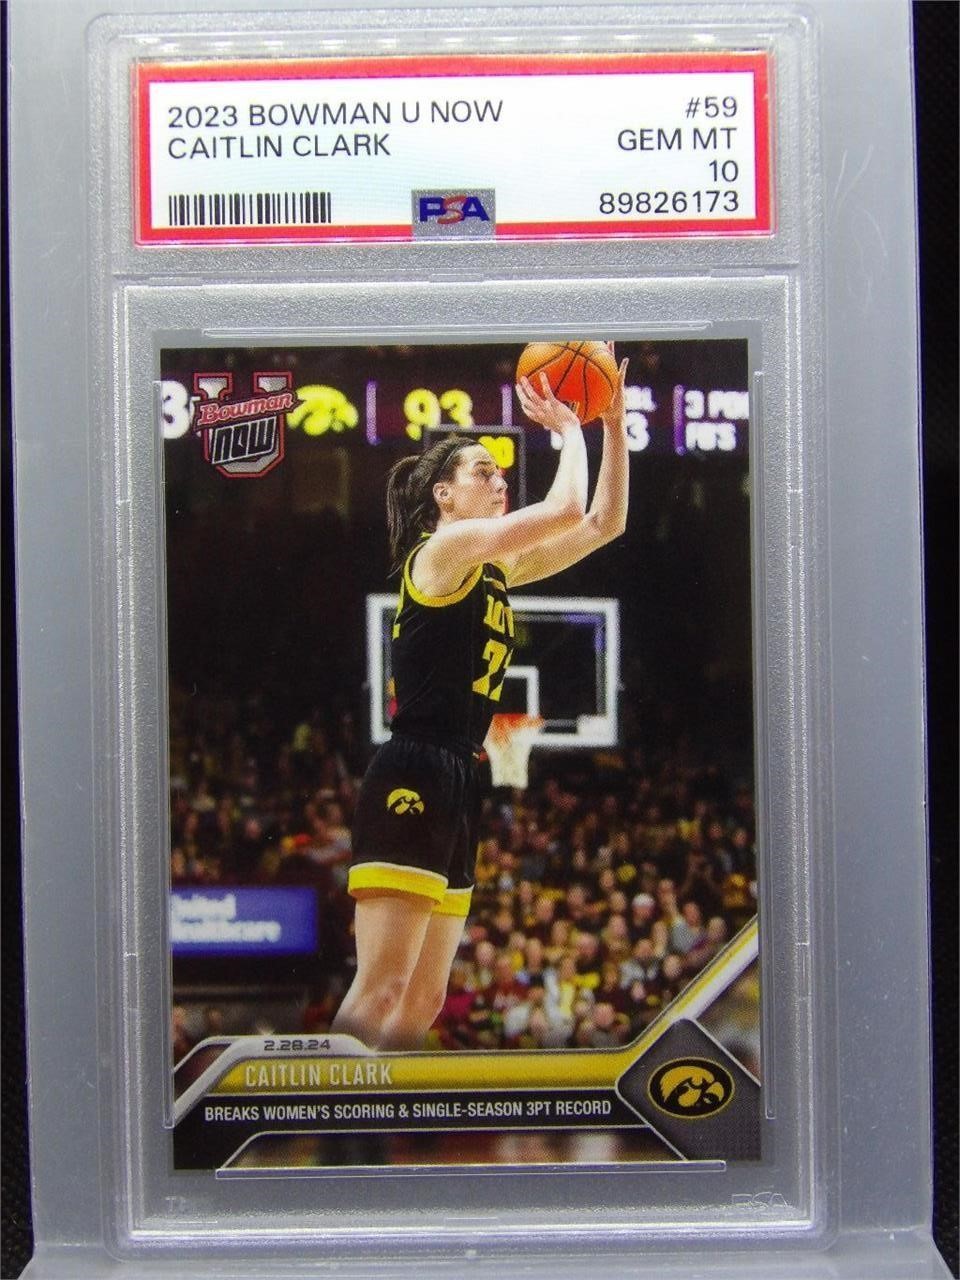 Sports Card Auction Ending May 26th at 7:00 PM Central